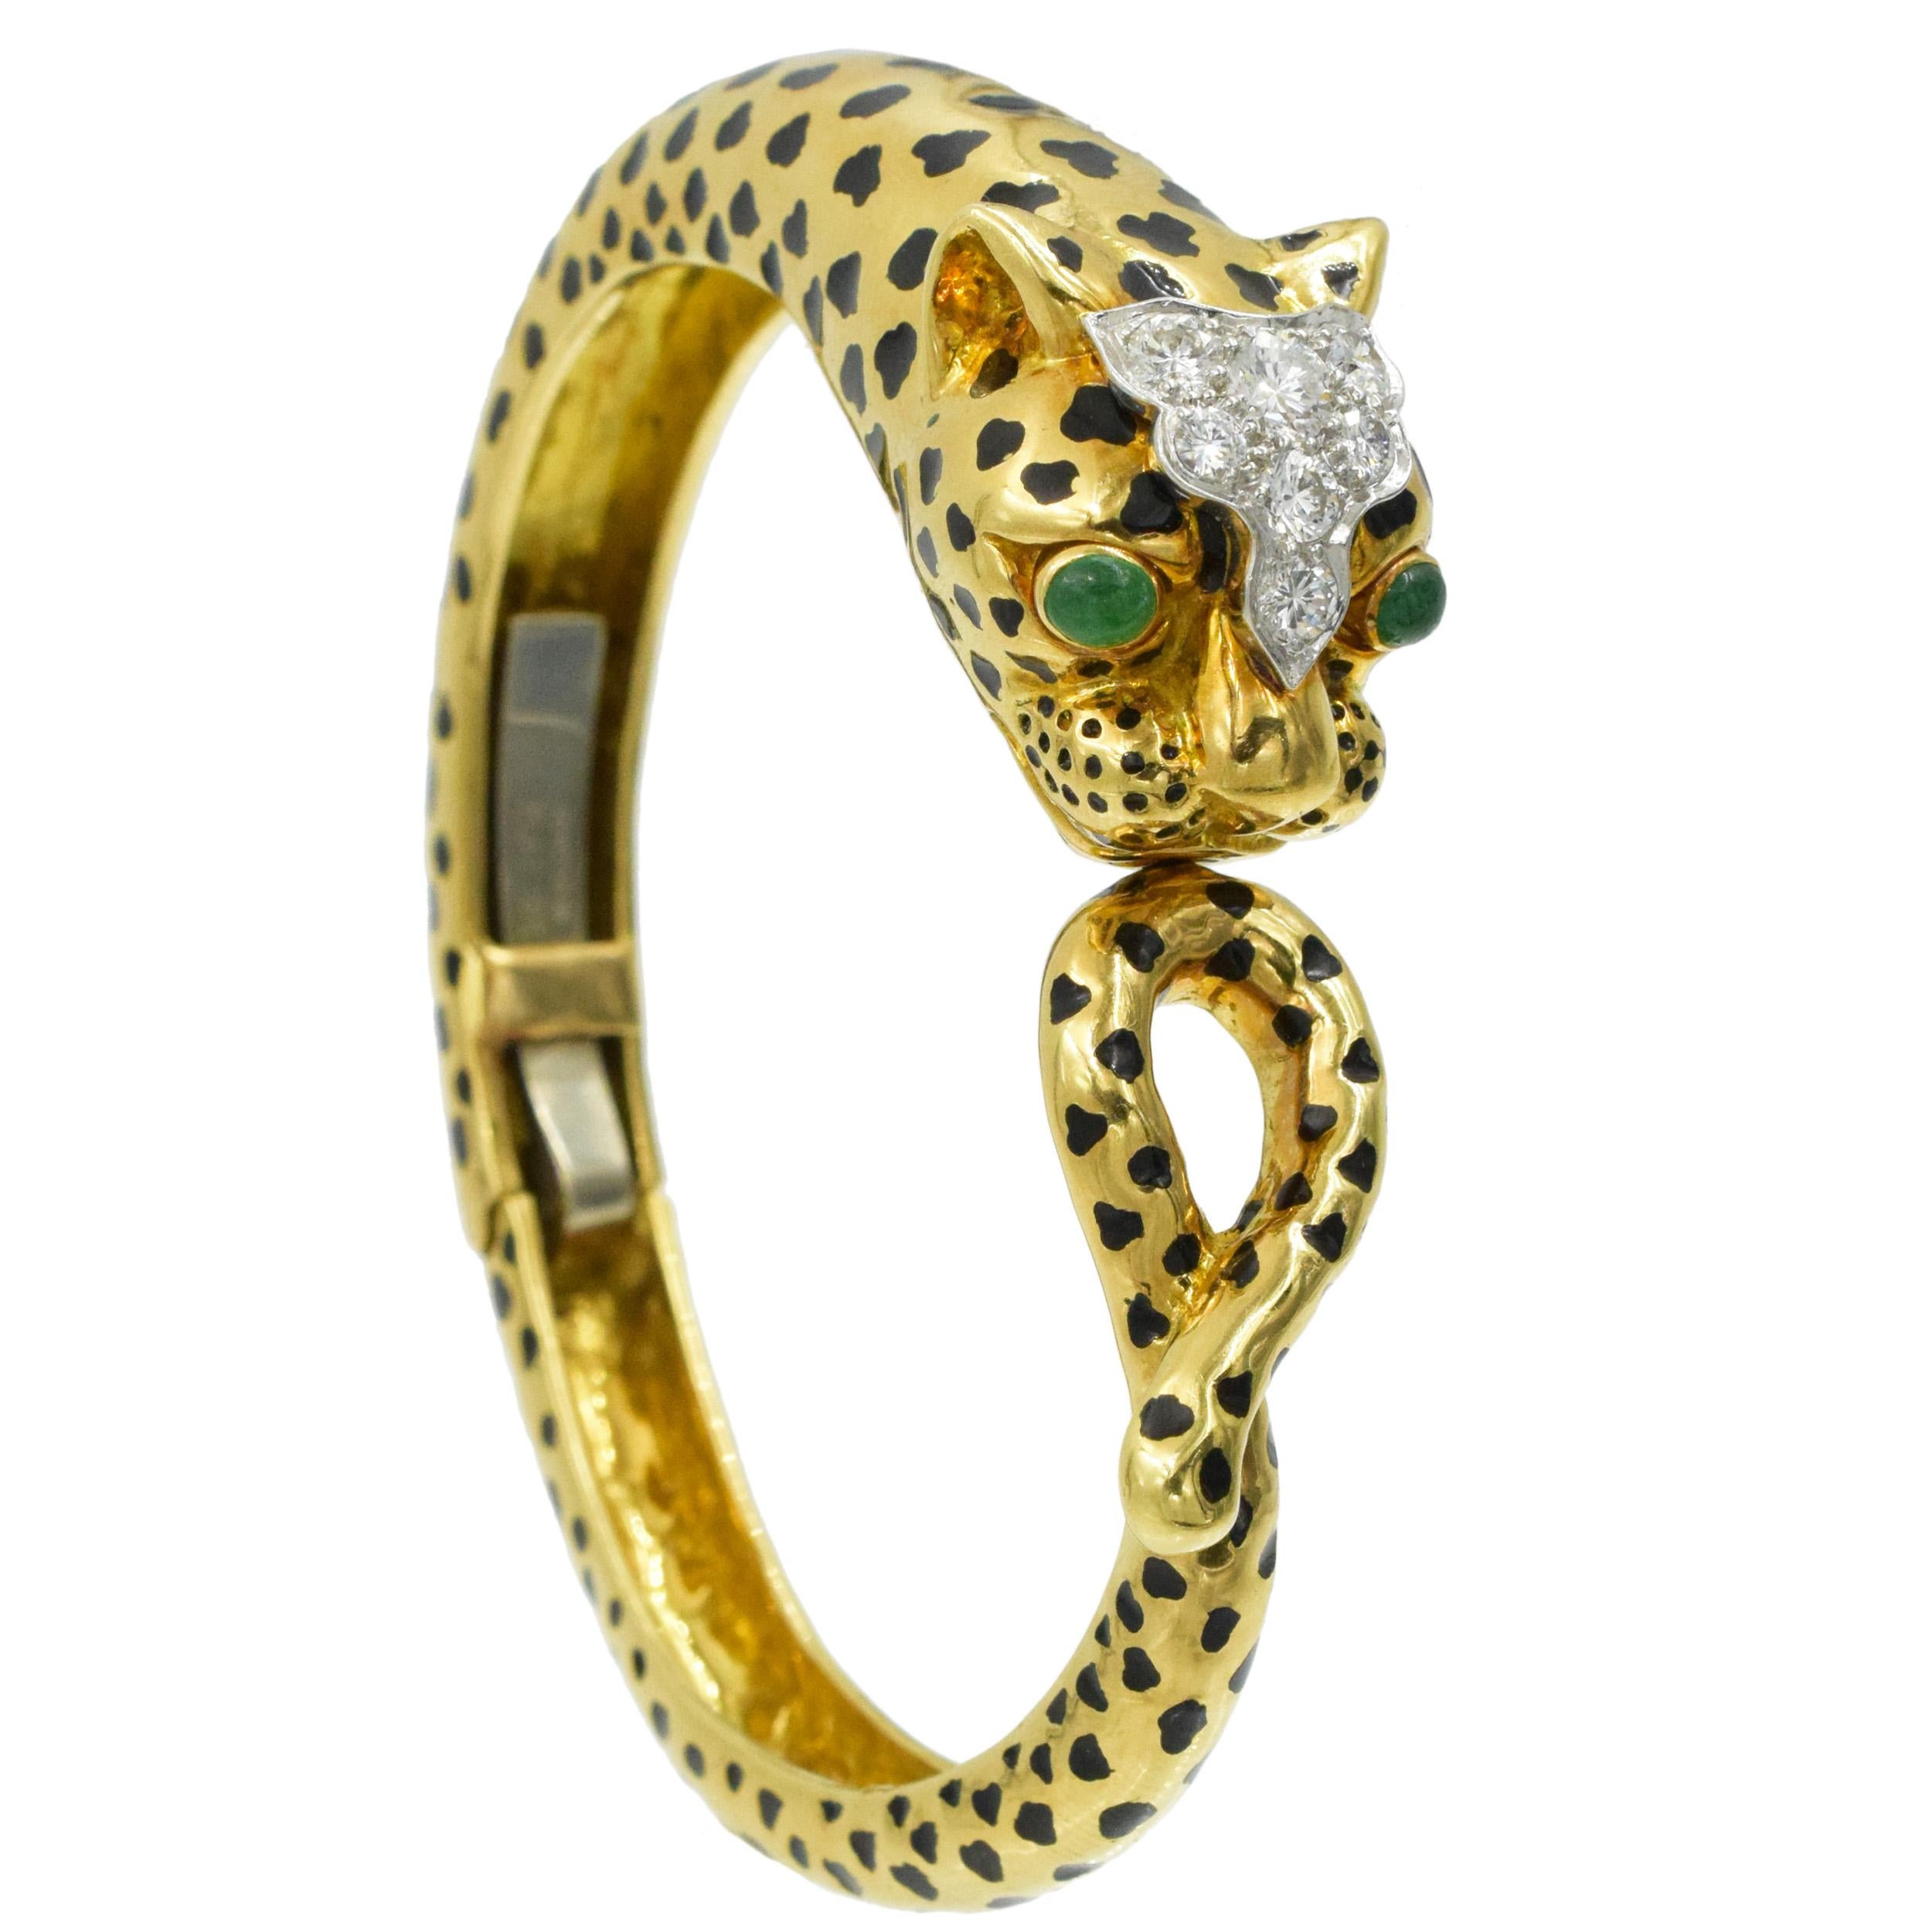 David Webb Diamond, emerald and black enamel
Leopard bracelet in 18k yellow gold and platinum. This  bangle features 18K  yellow gold leopard head with bezel set cabochon emerald  eyes and top of the head in platinum, encrusted with 7 round